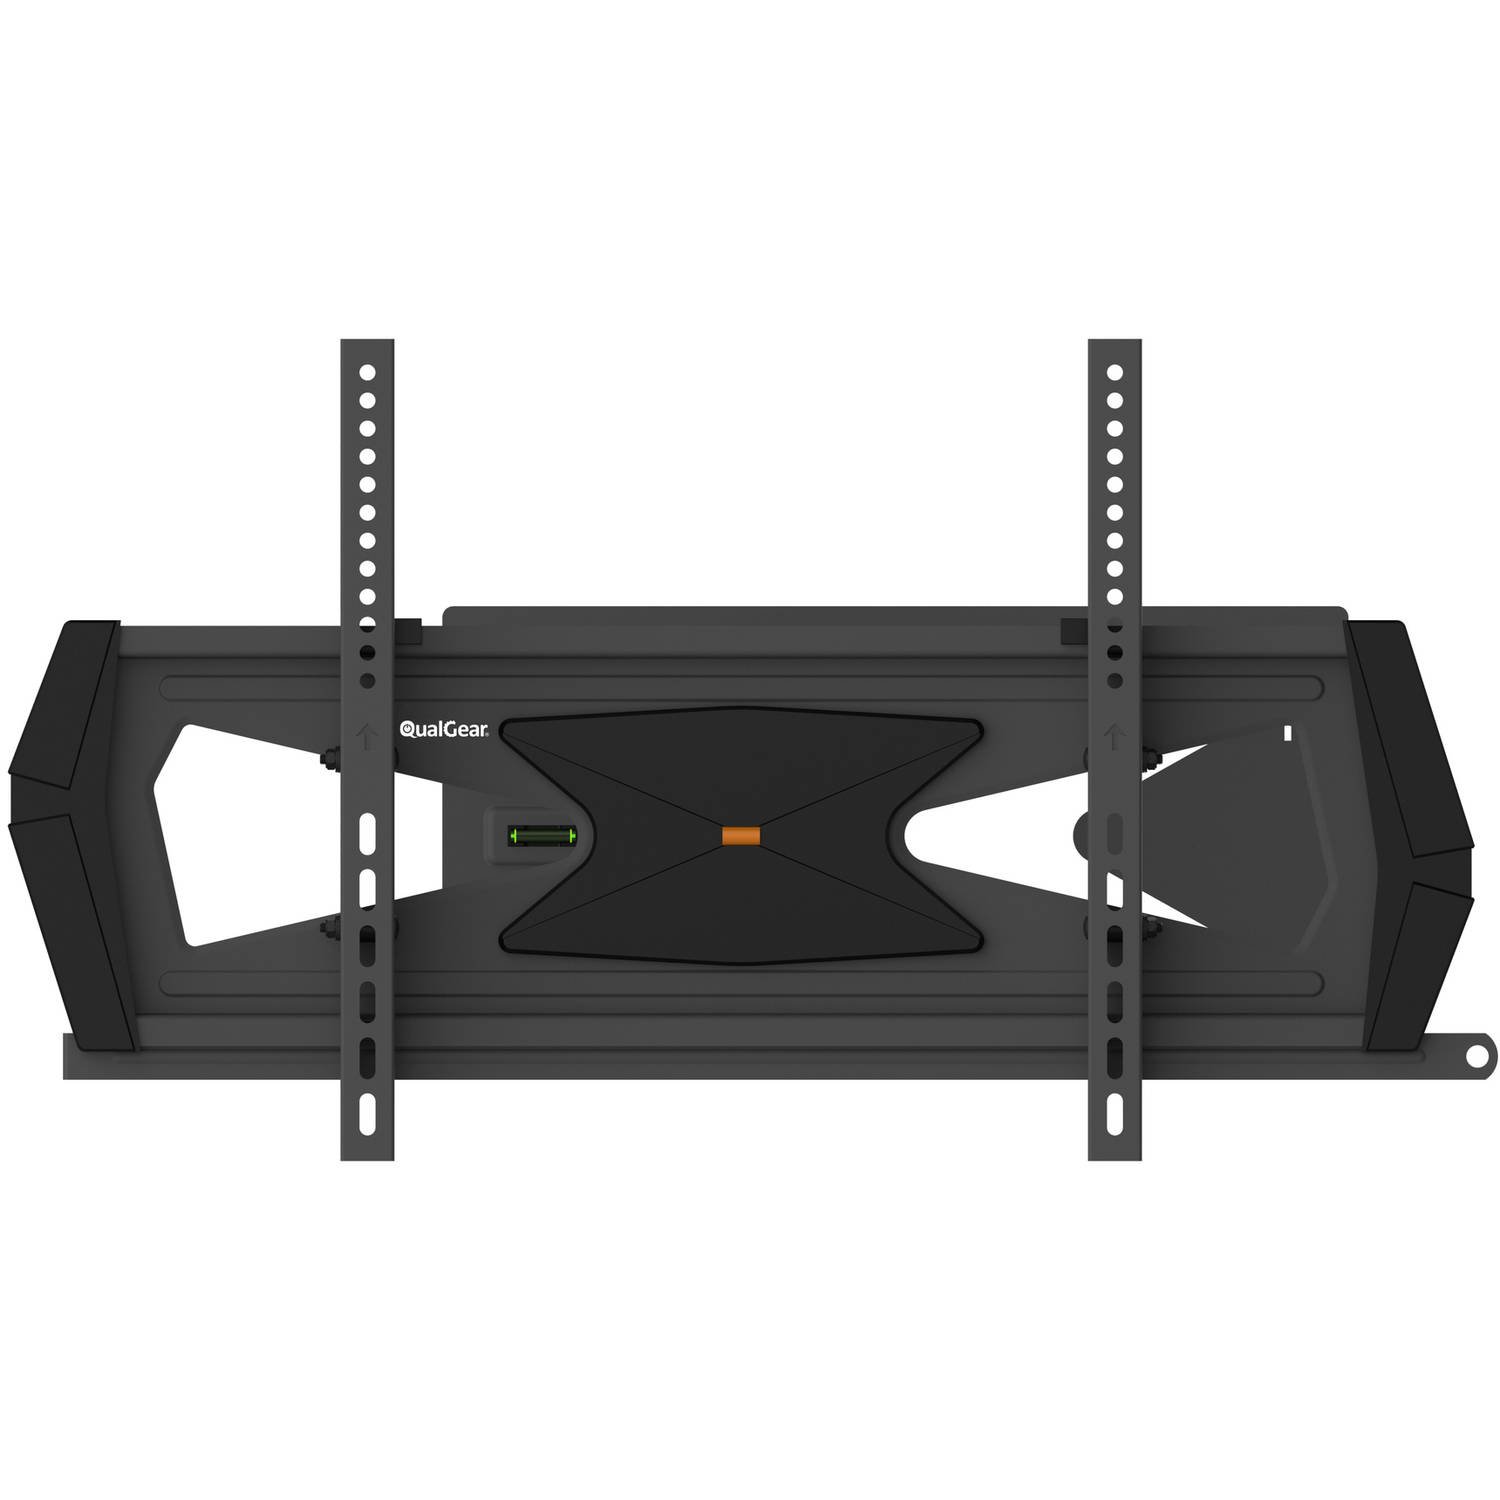 QualGear Heavy-Duty Full Motion TV Wall Mount For Most 37""-70"" Flat Panel and Curved TVs, Black